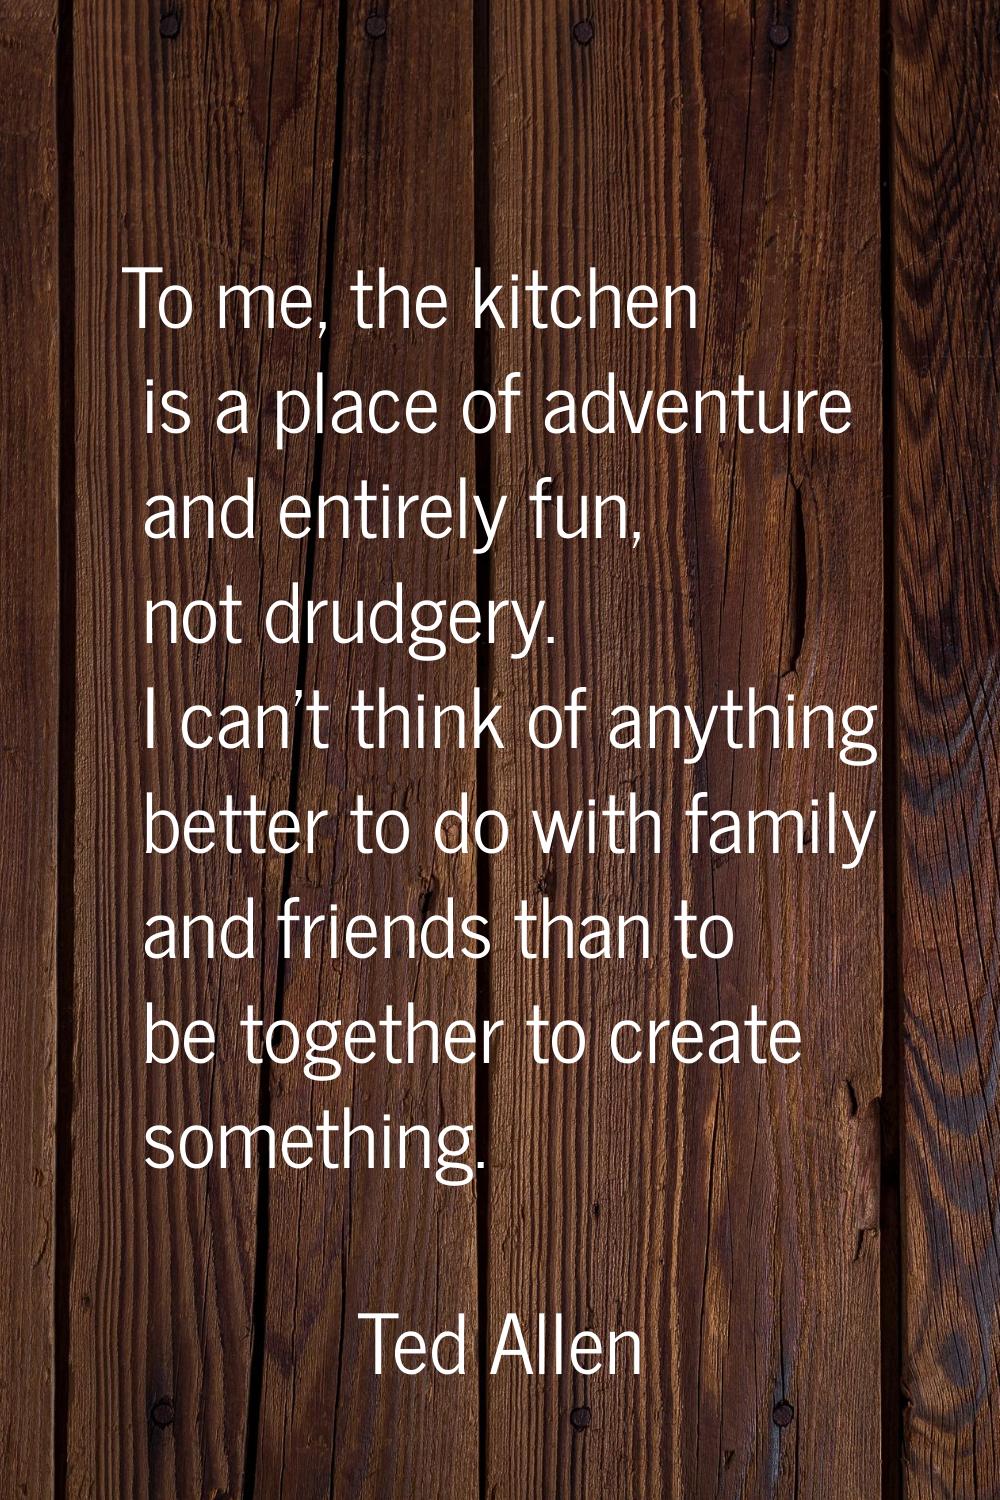 To me, the kitchen is a place of adventure and entirely fun, not drudgery. I can't think of anythin